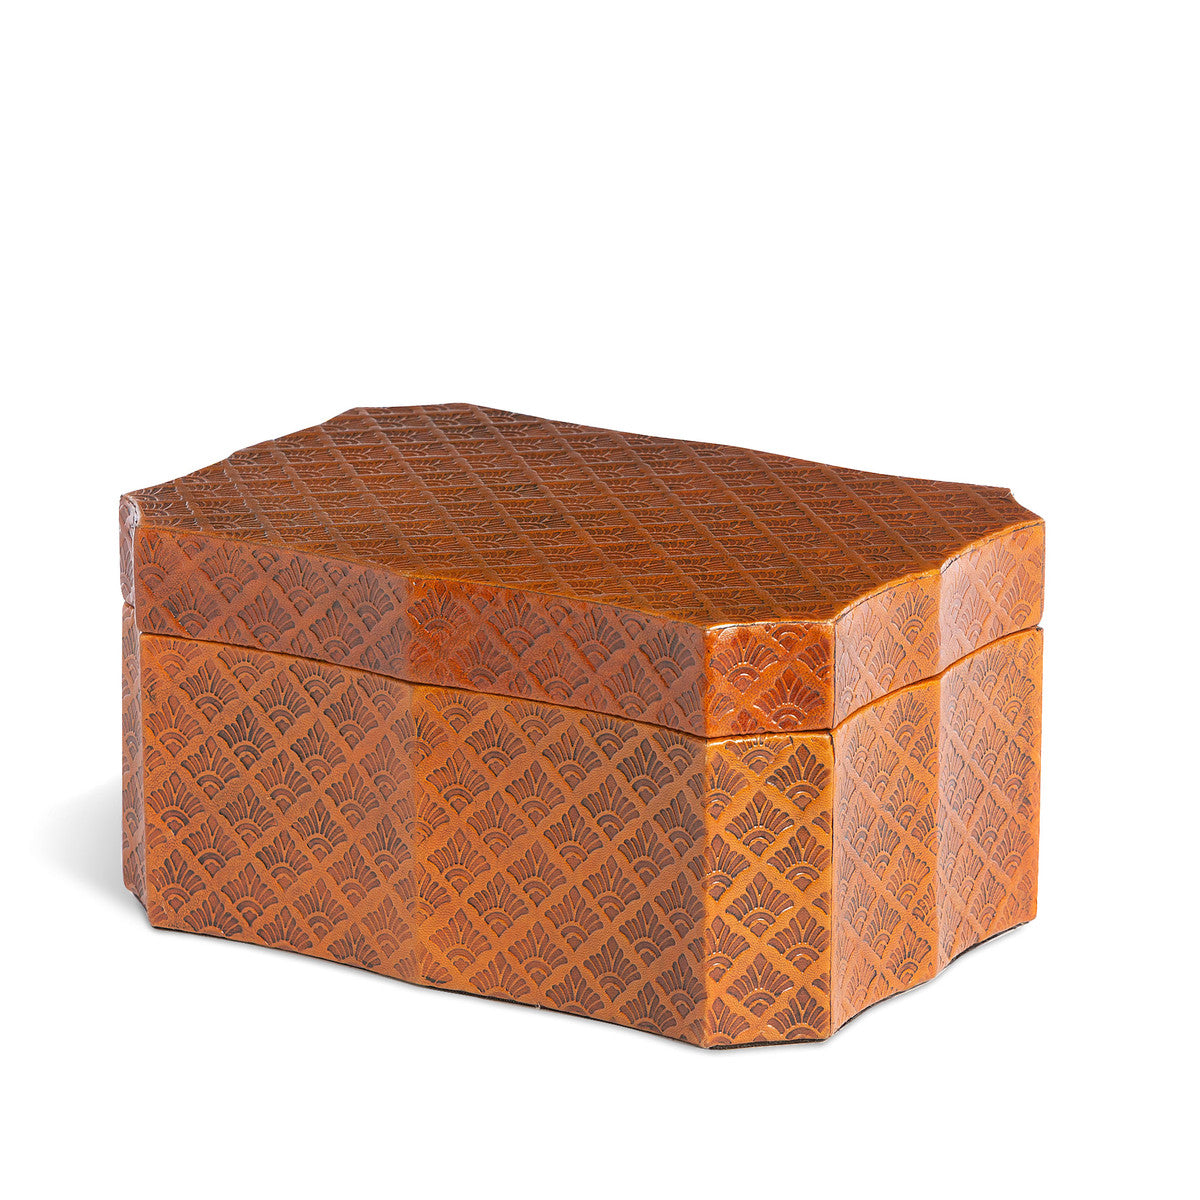 Lovecup Lila Leather Embossed Storage Box L312